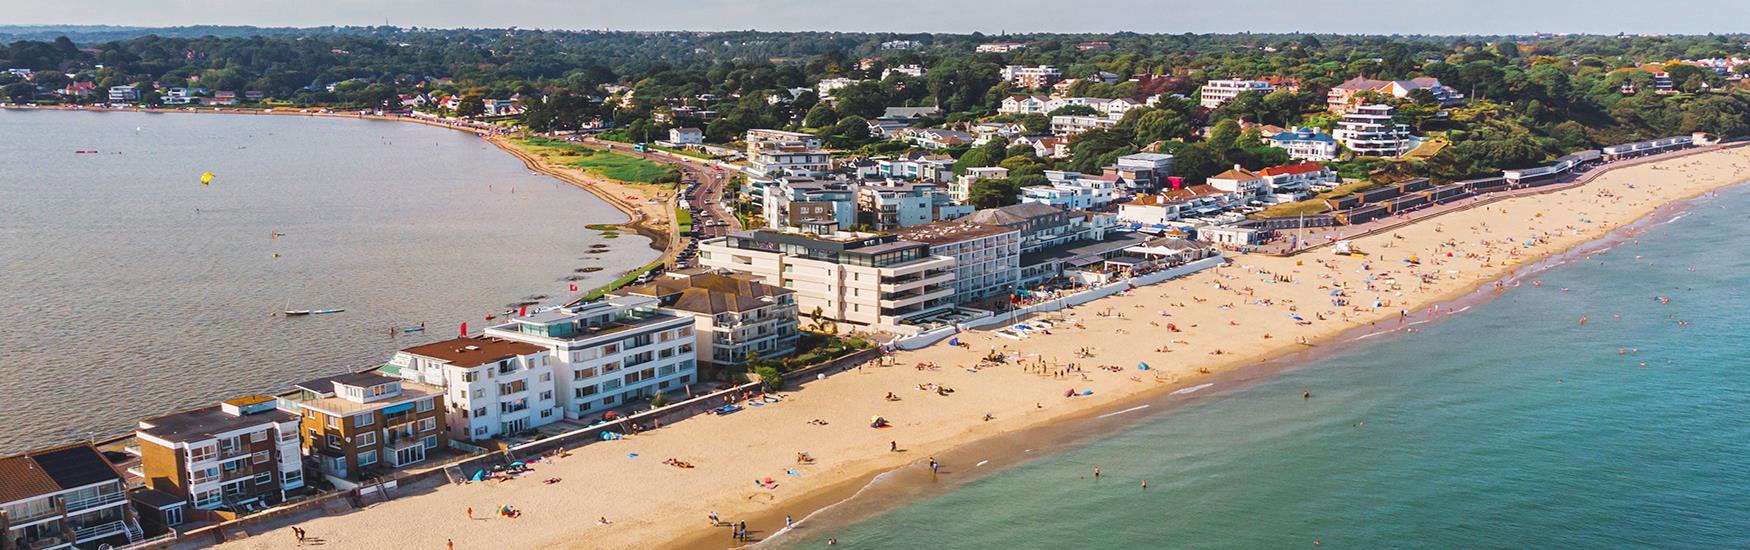 Amazing birds eye shot of an area of Sandbanks beach with visitors lapping up the sun and sea on a lovely sunny day